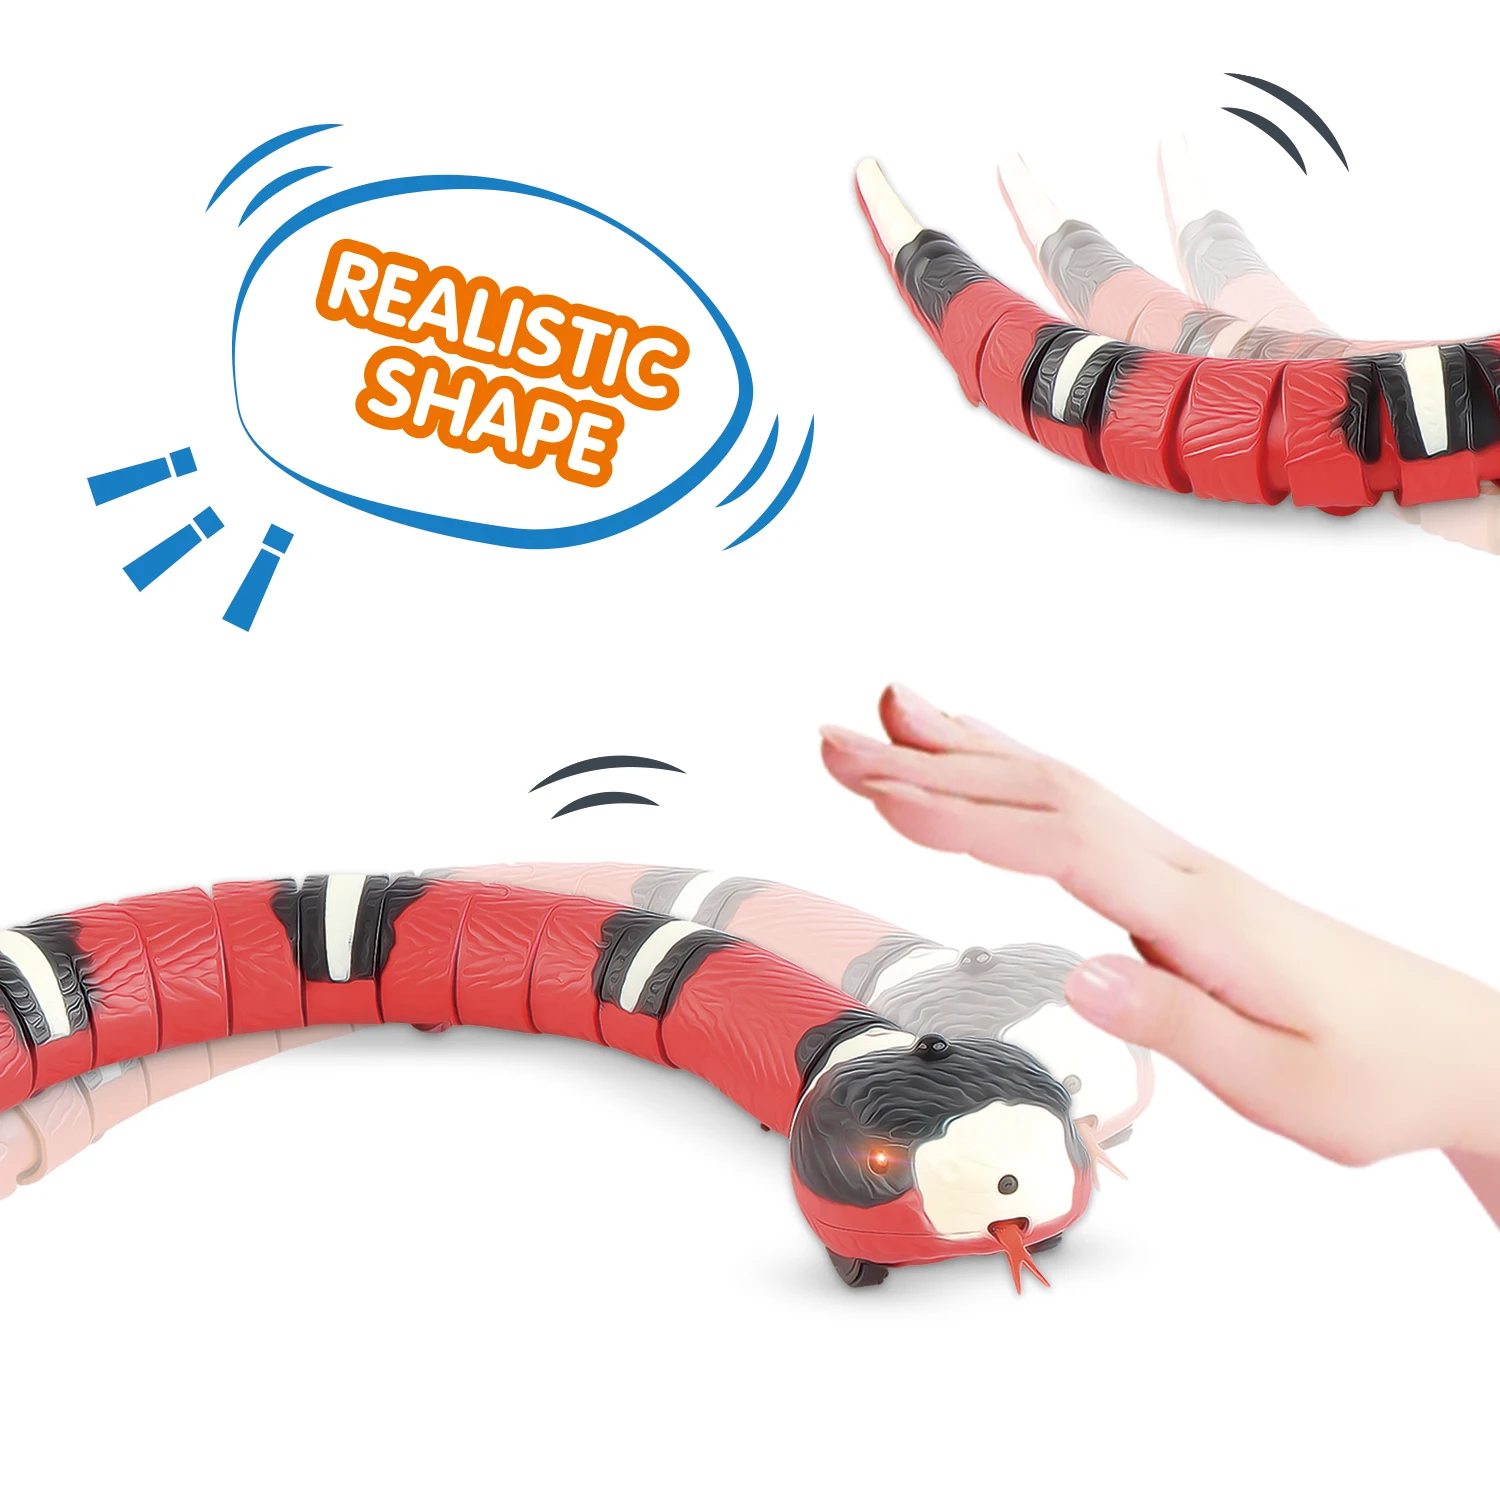 FENGTAI Cat Toy Trick Terrifying Mischief Kids Snake Electric Simulation Trickery 9909S Robotic Animal Pet  Funny Novelty Gift